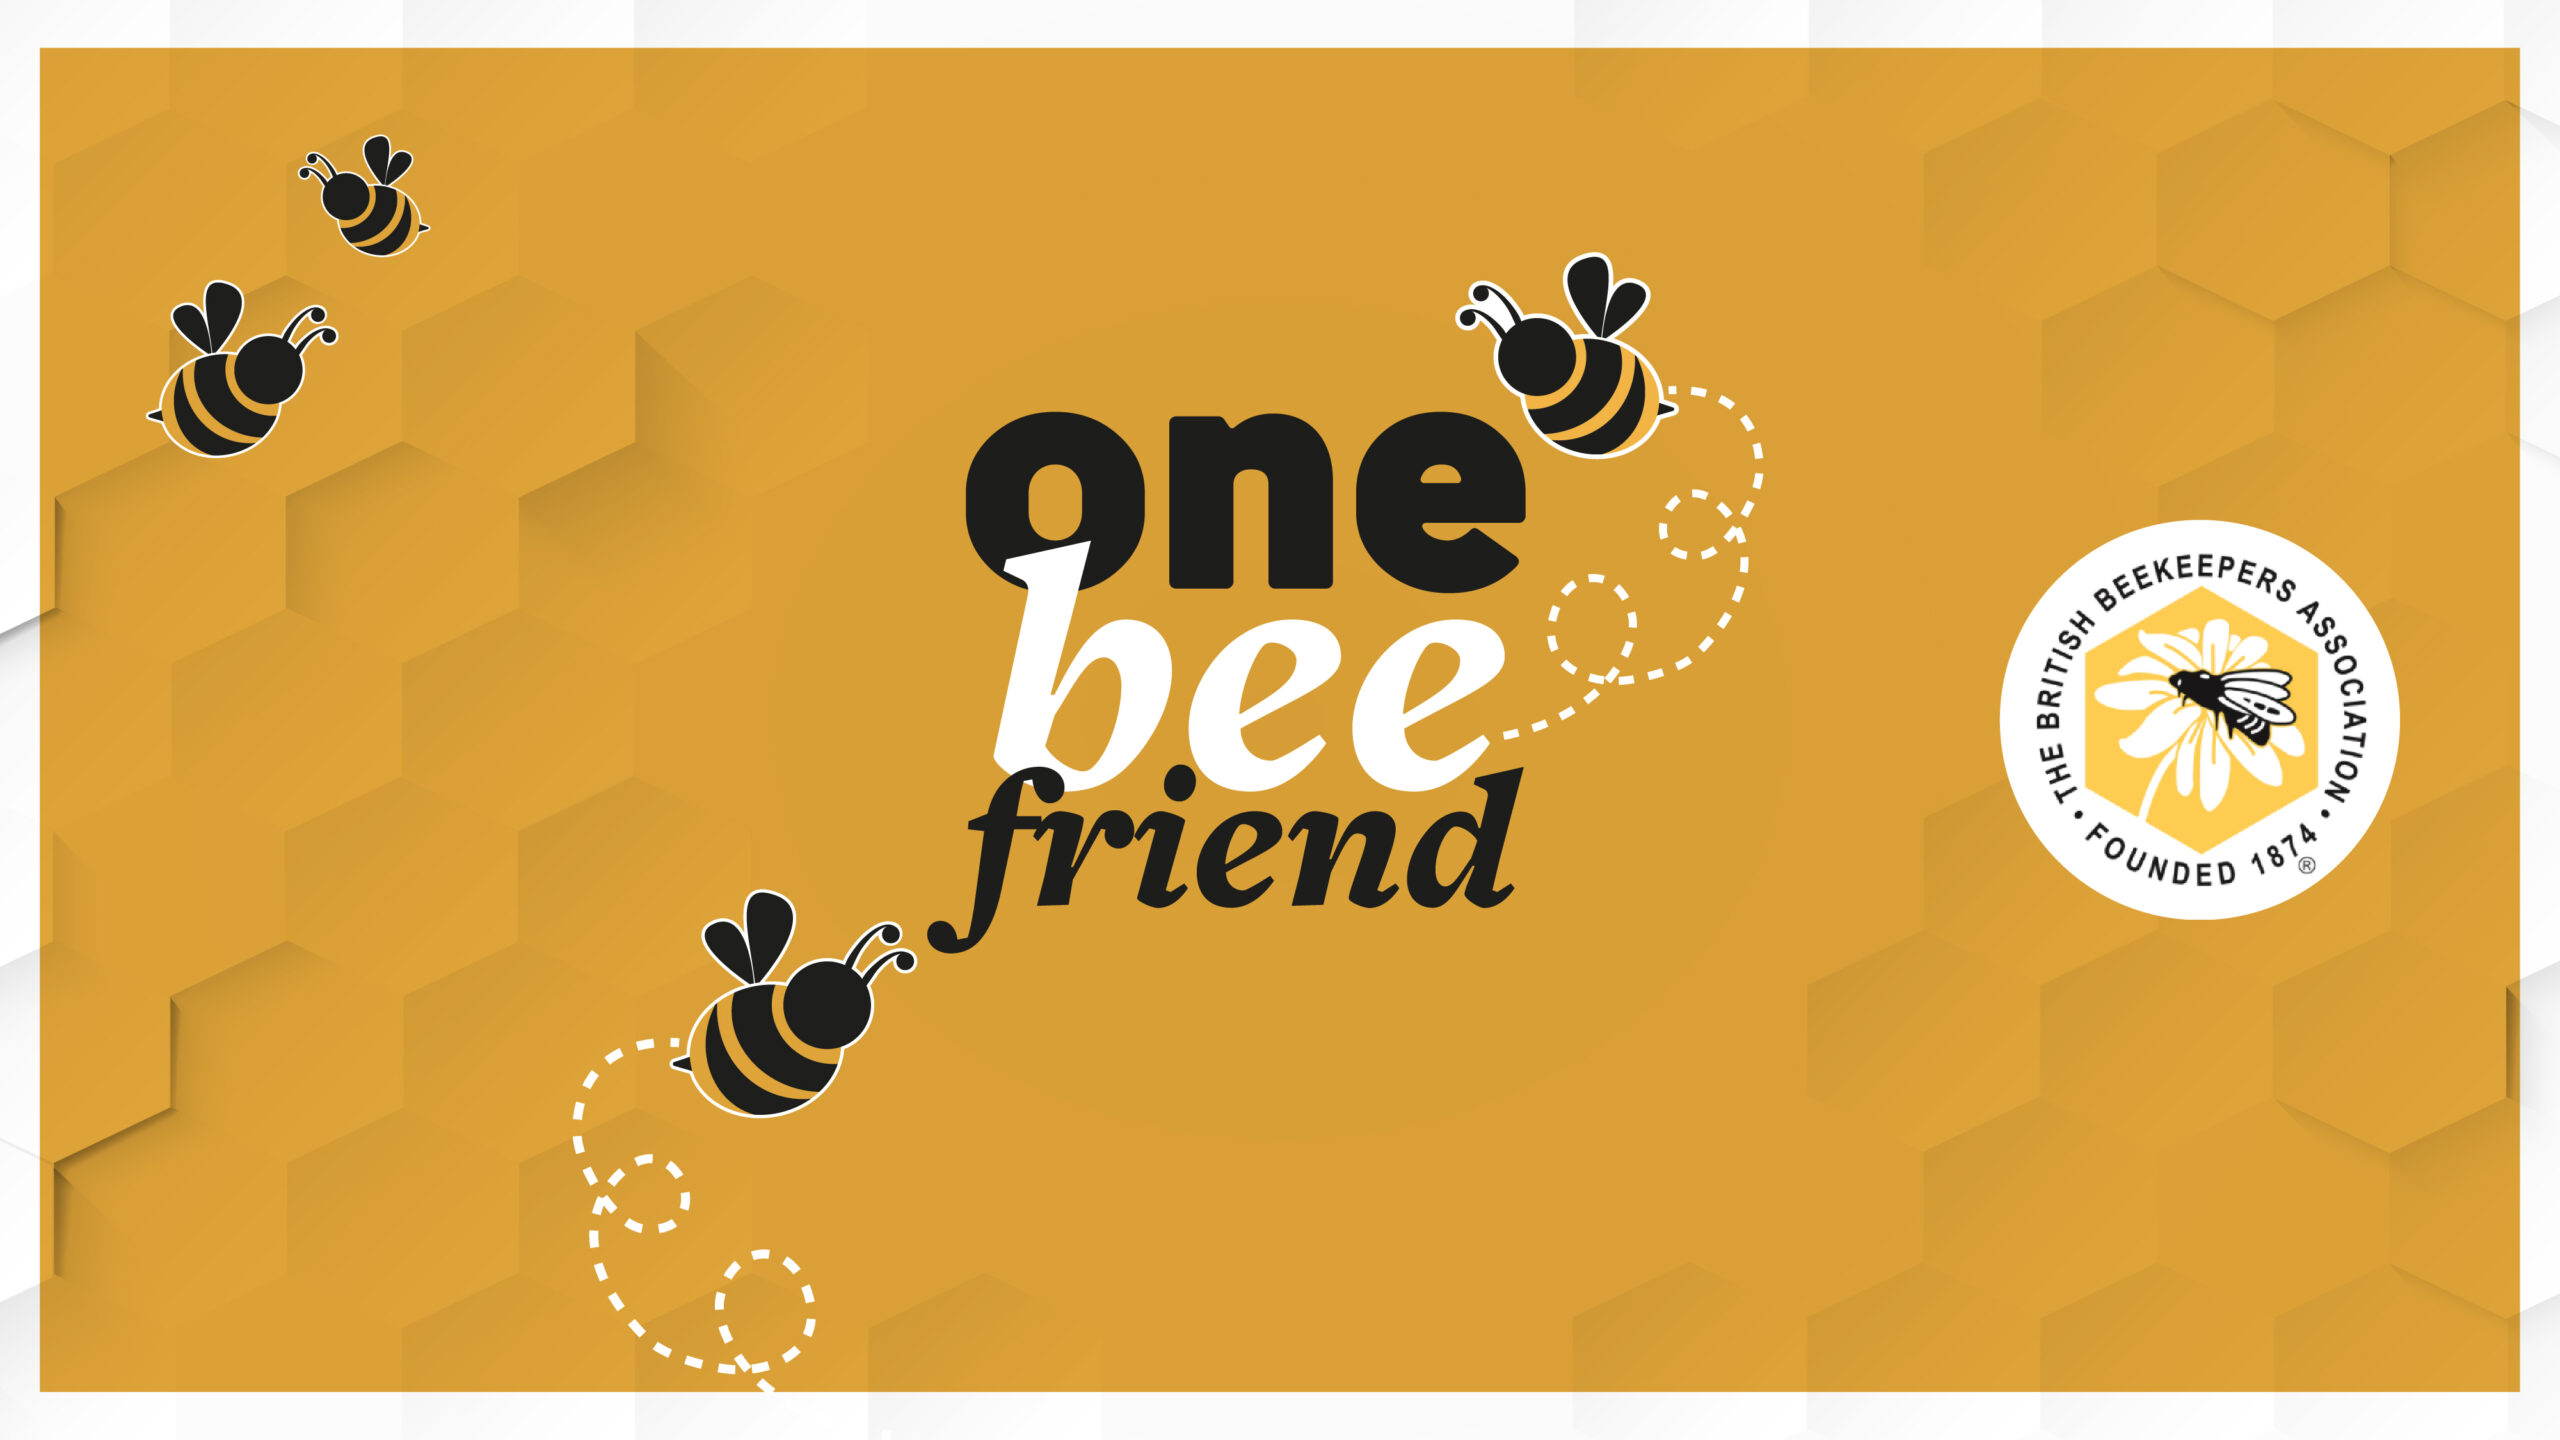 Bobike helps to save the bees!